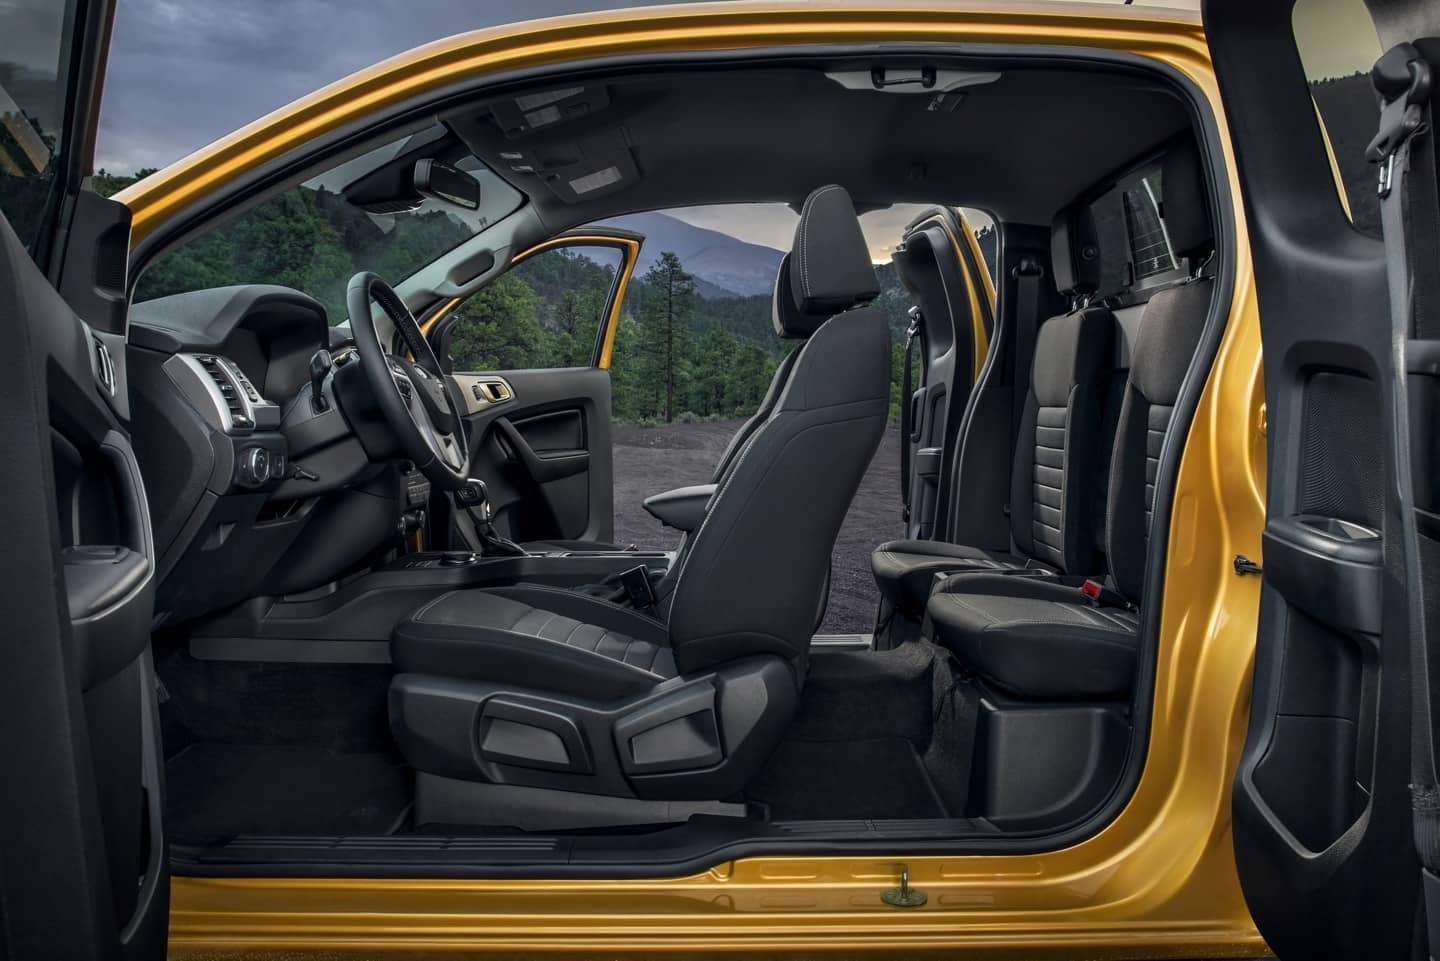 Ford Ranger Interior with all SuperCab doors open.